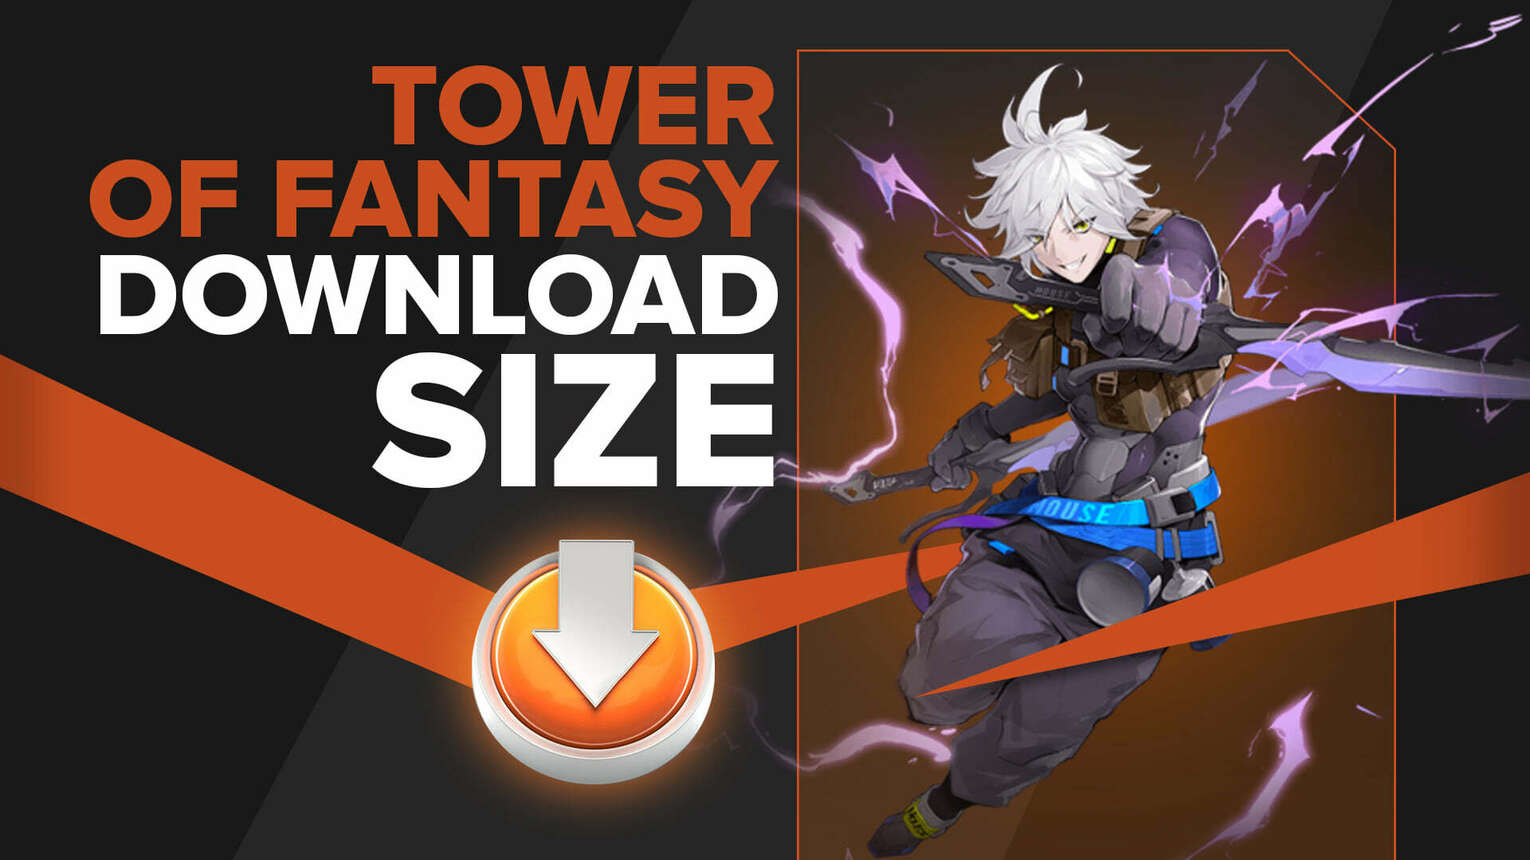 Tower of Fantasy Download Size: System Requirements & More